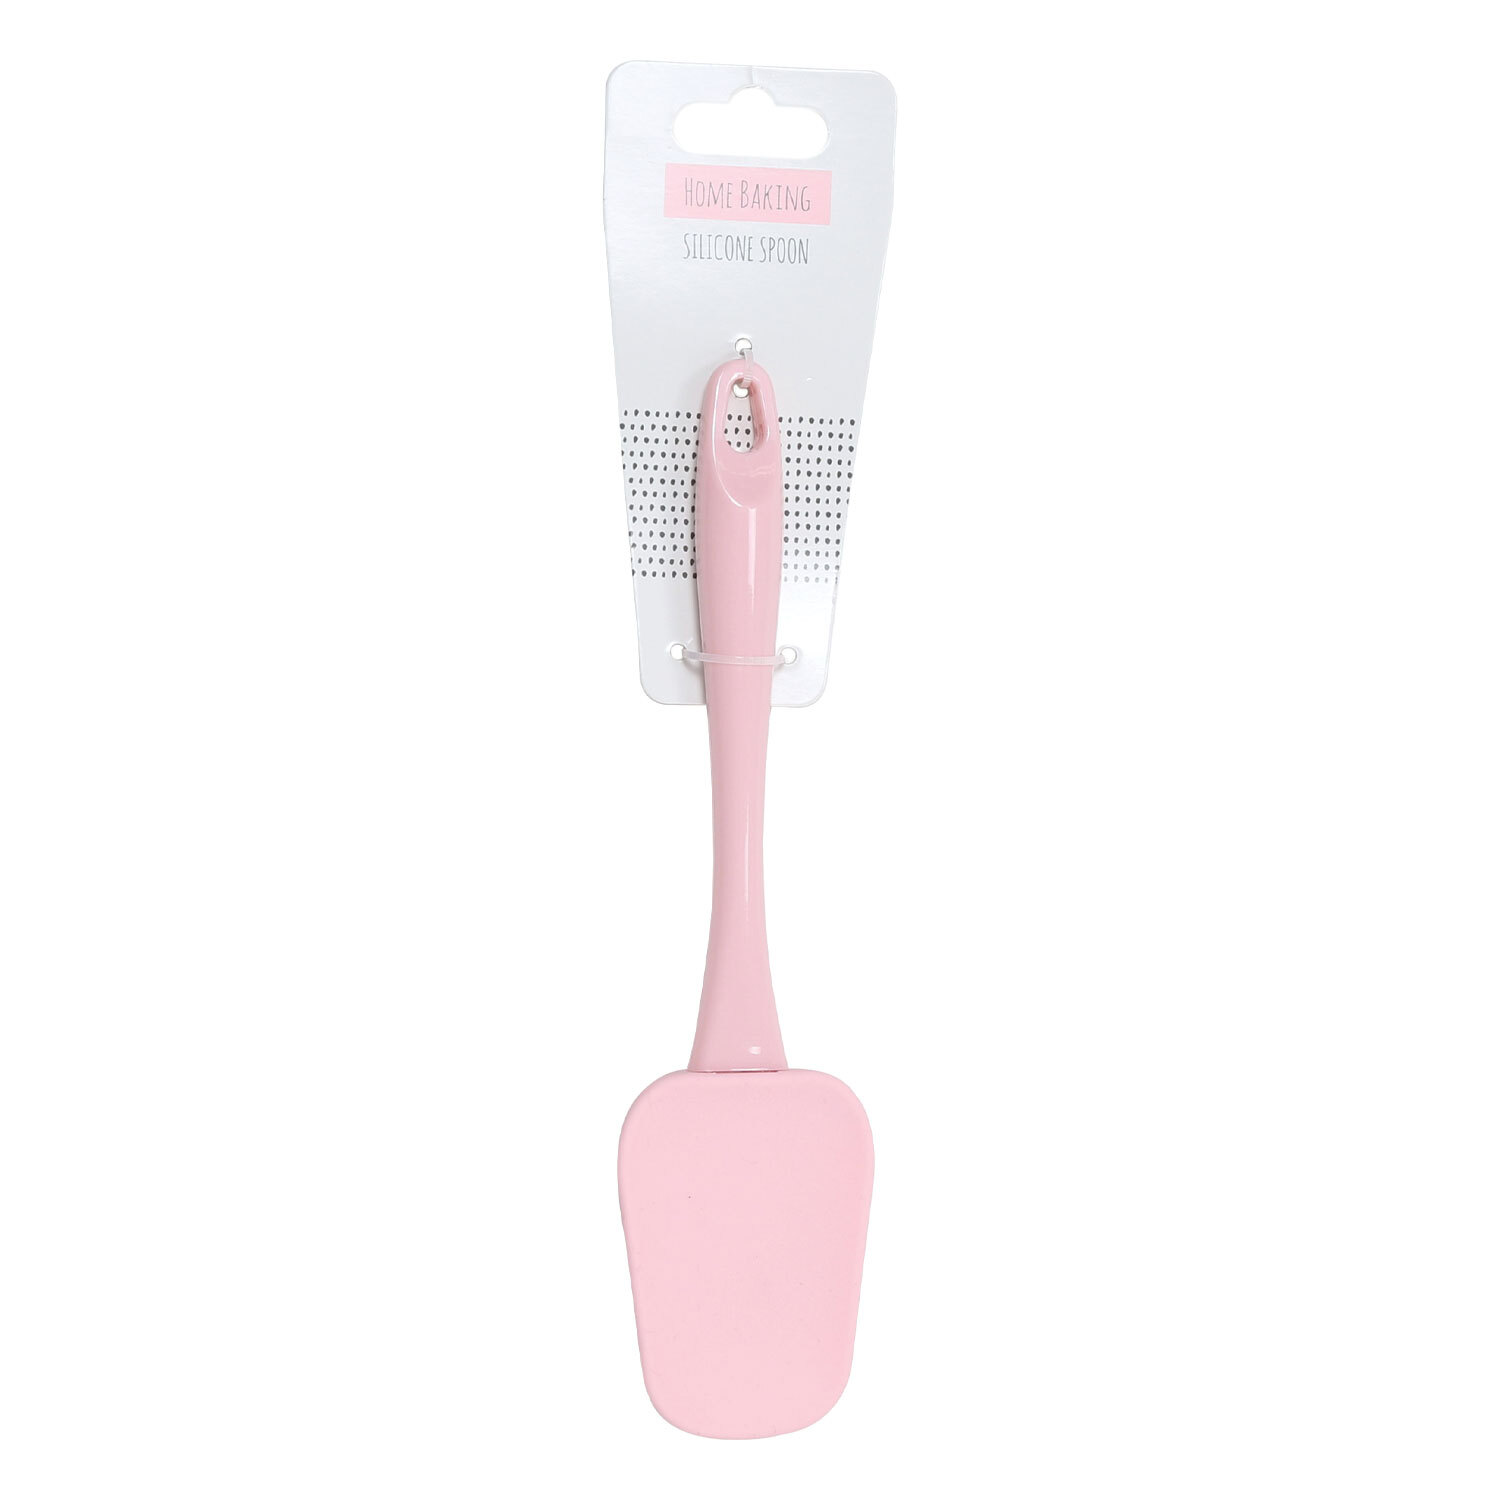 Silicone Spoon Image 3